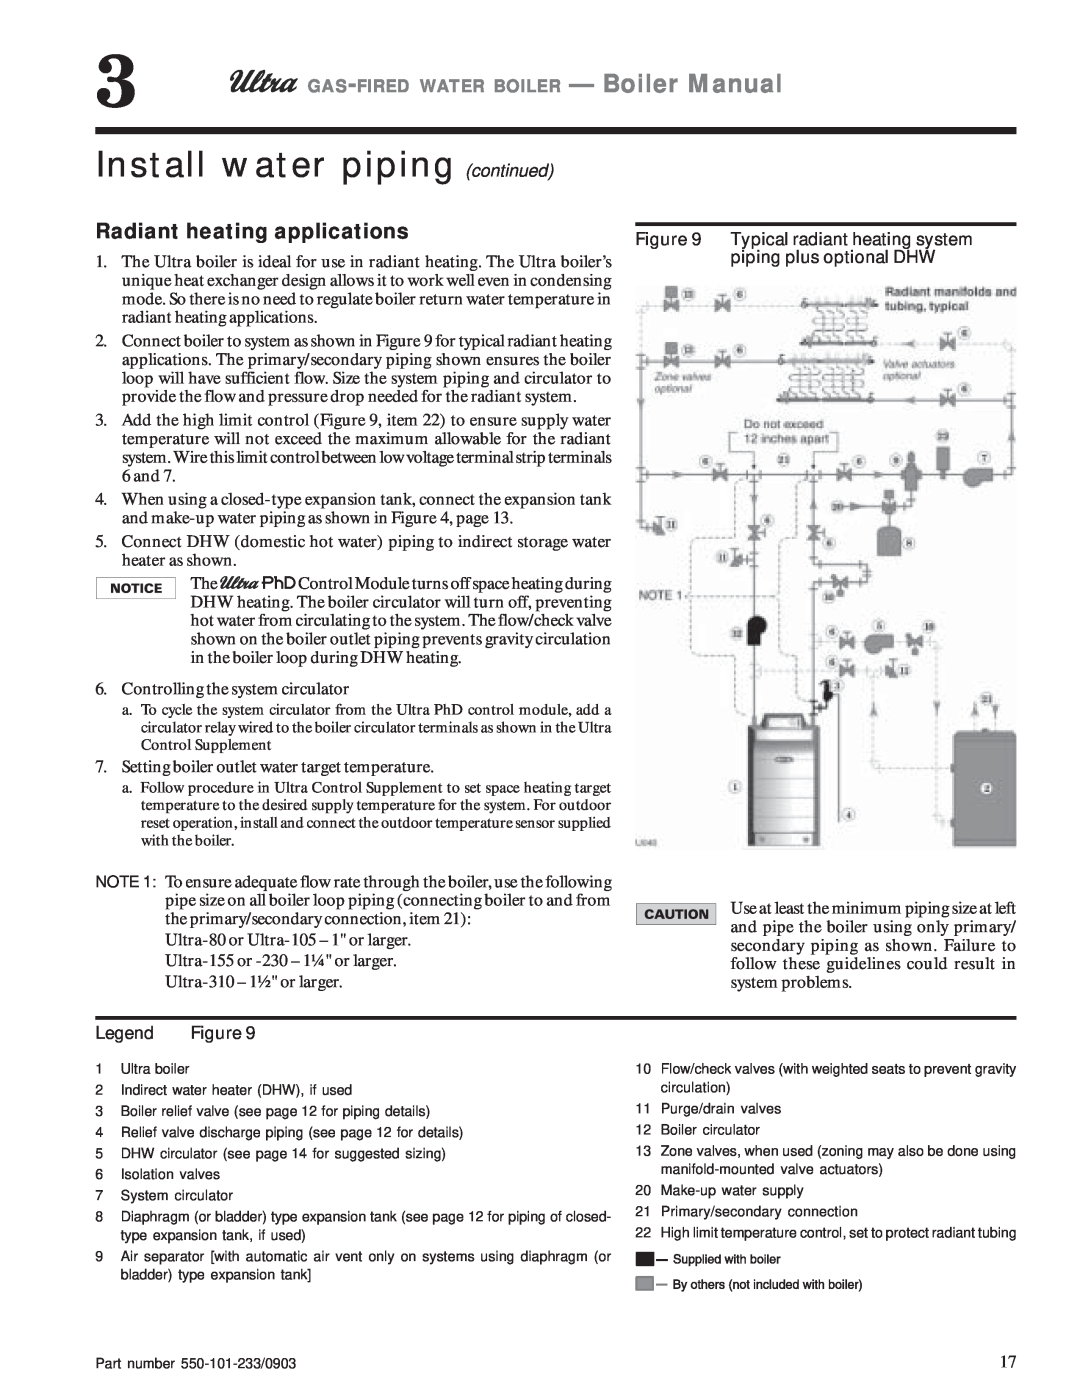 Weil-McLain 310, 80 Install water piping continued, Radiant heating applications, GAS-FIRED WATER BOILER - Boiler Manual 